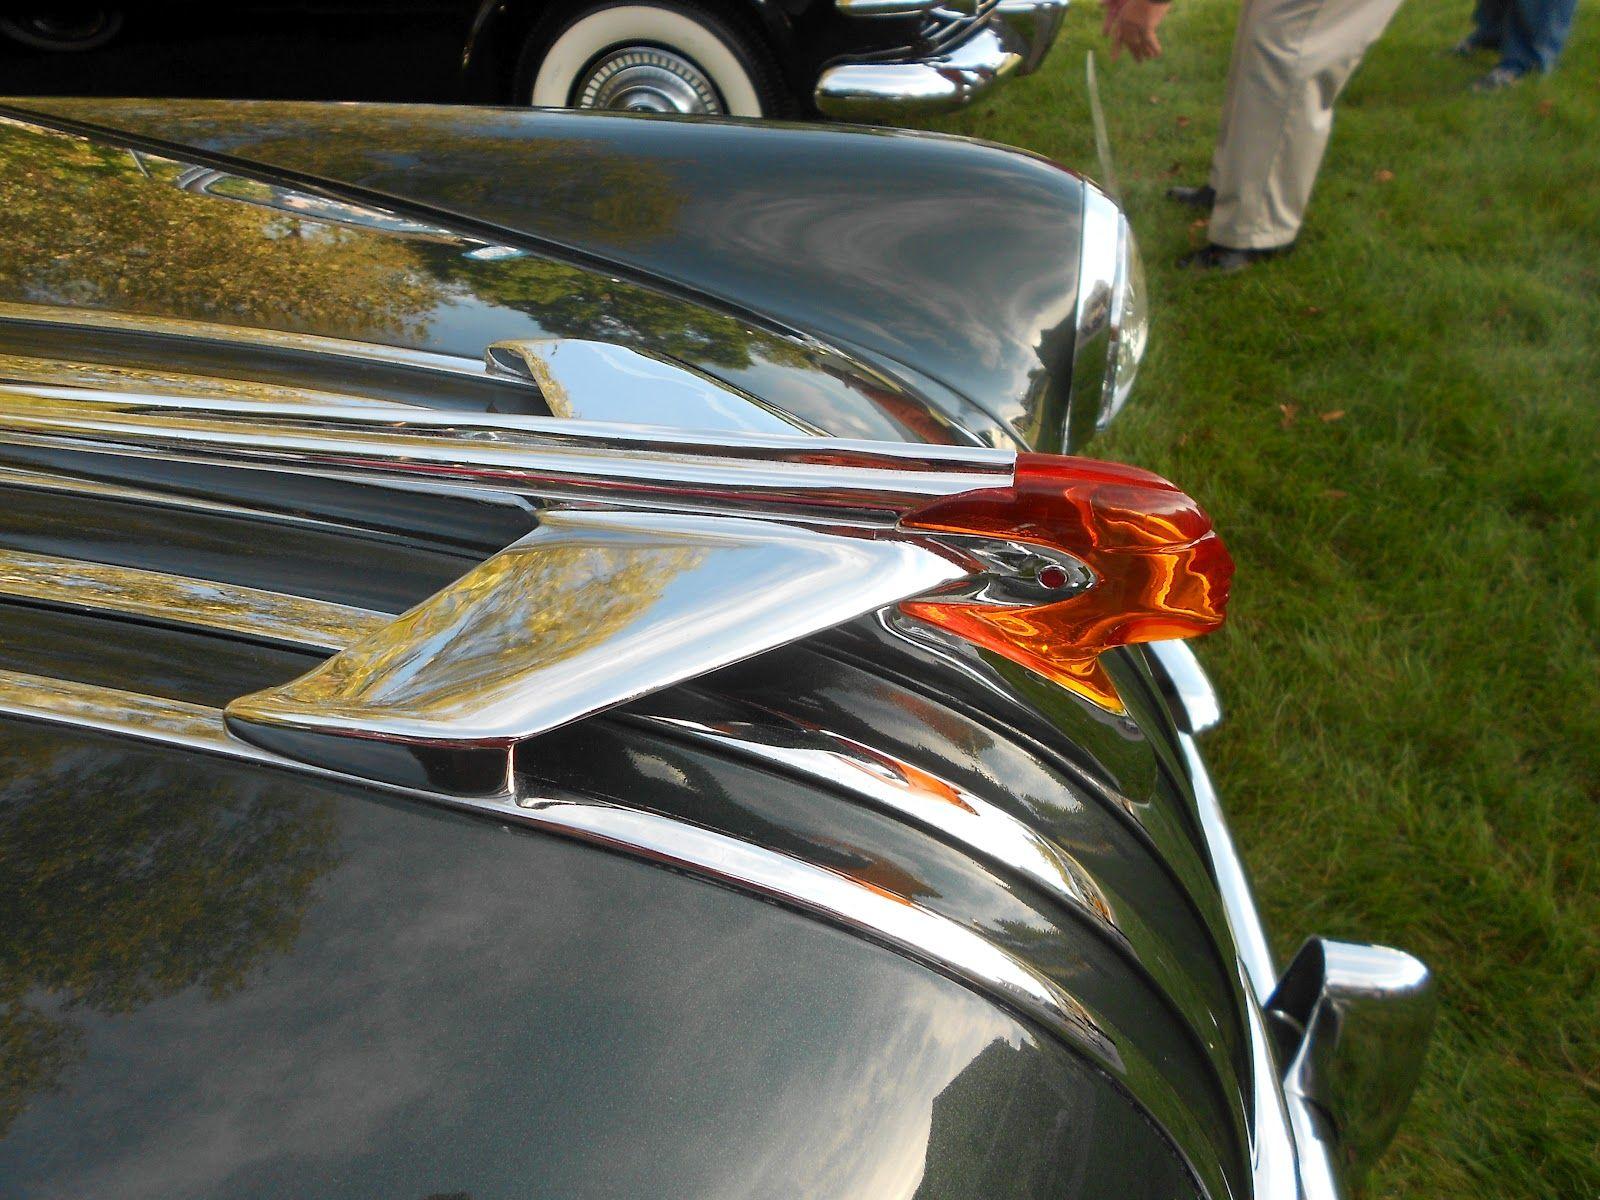 Upside Down Pontiac Logo - The Automobile and American Life: The Dayton Concours, September 16